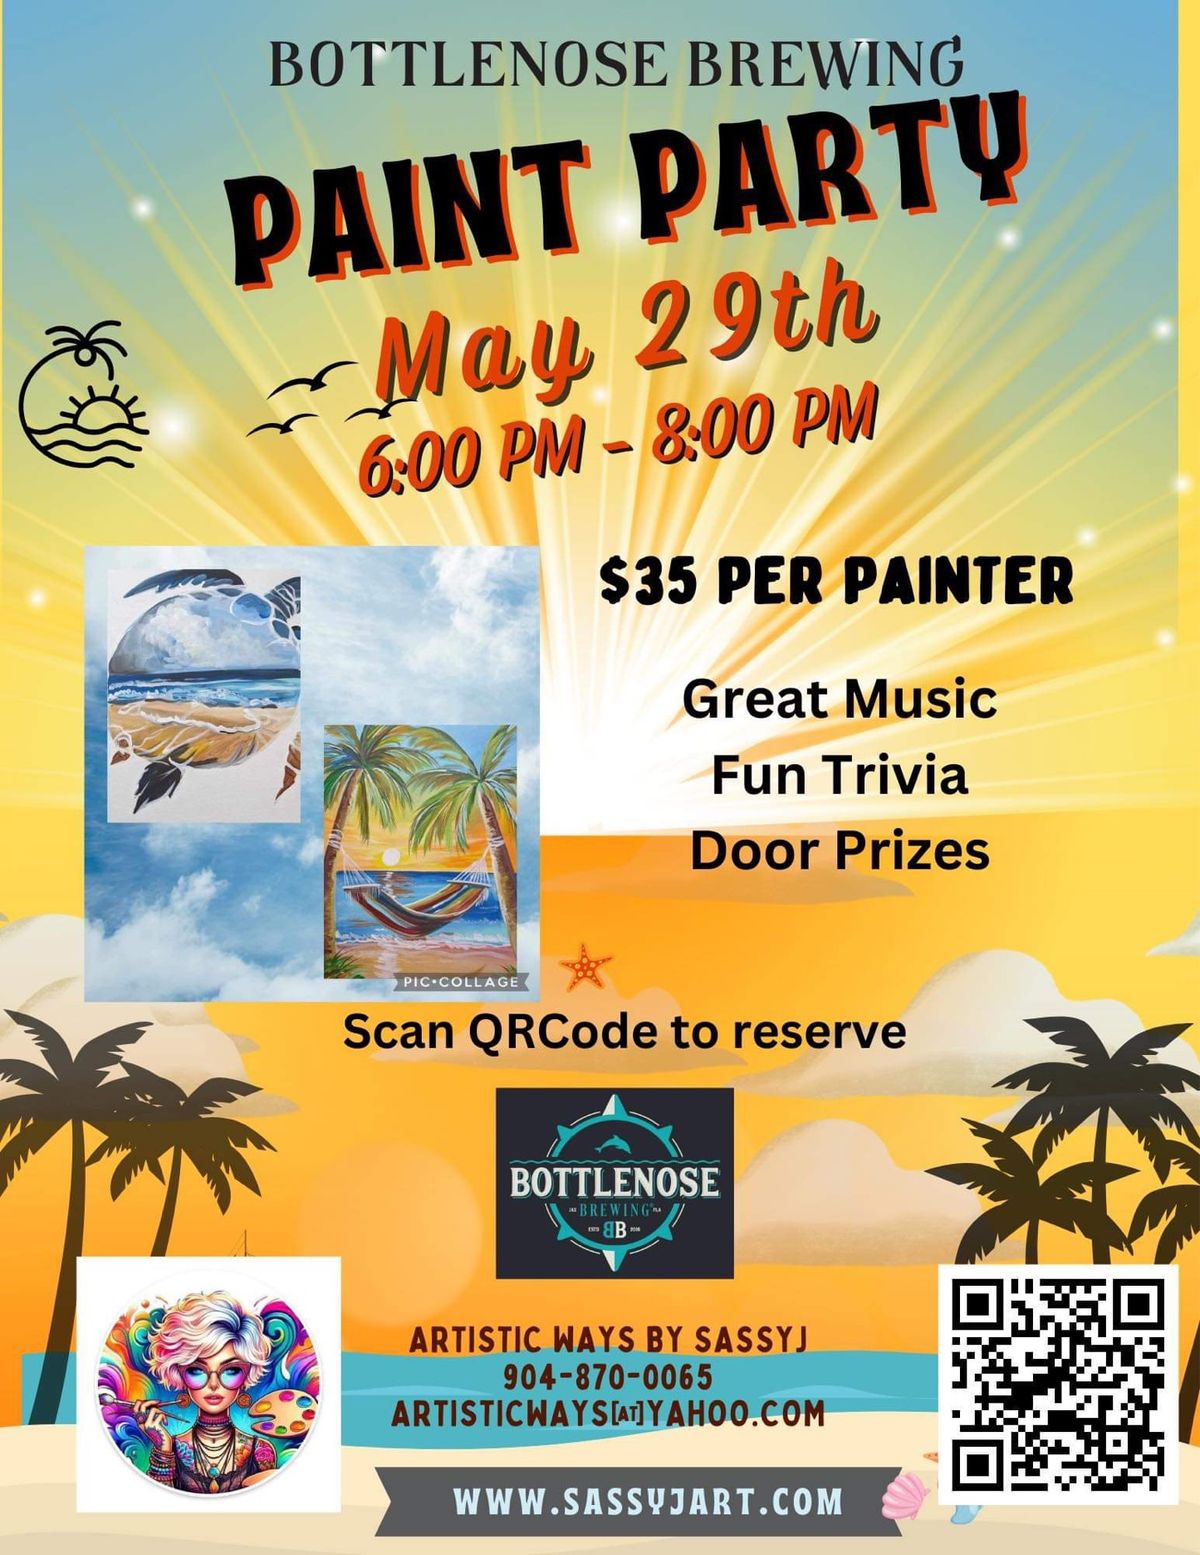 Bottlenose Brewing, May 29th, Painter\u2019s Choice 